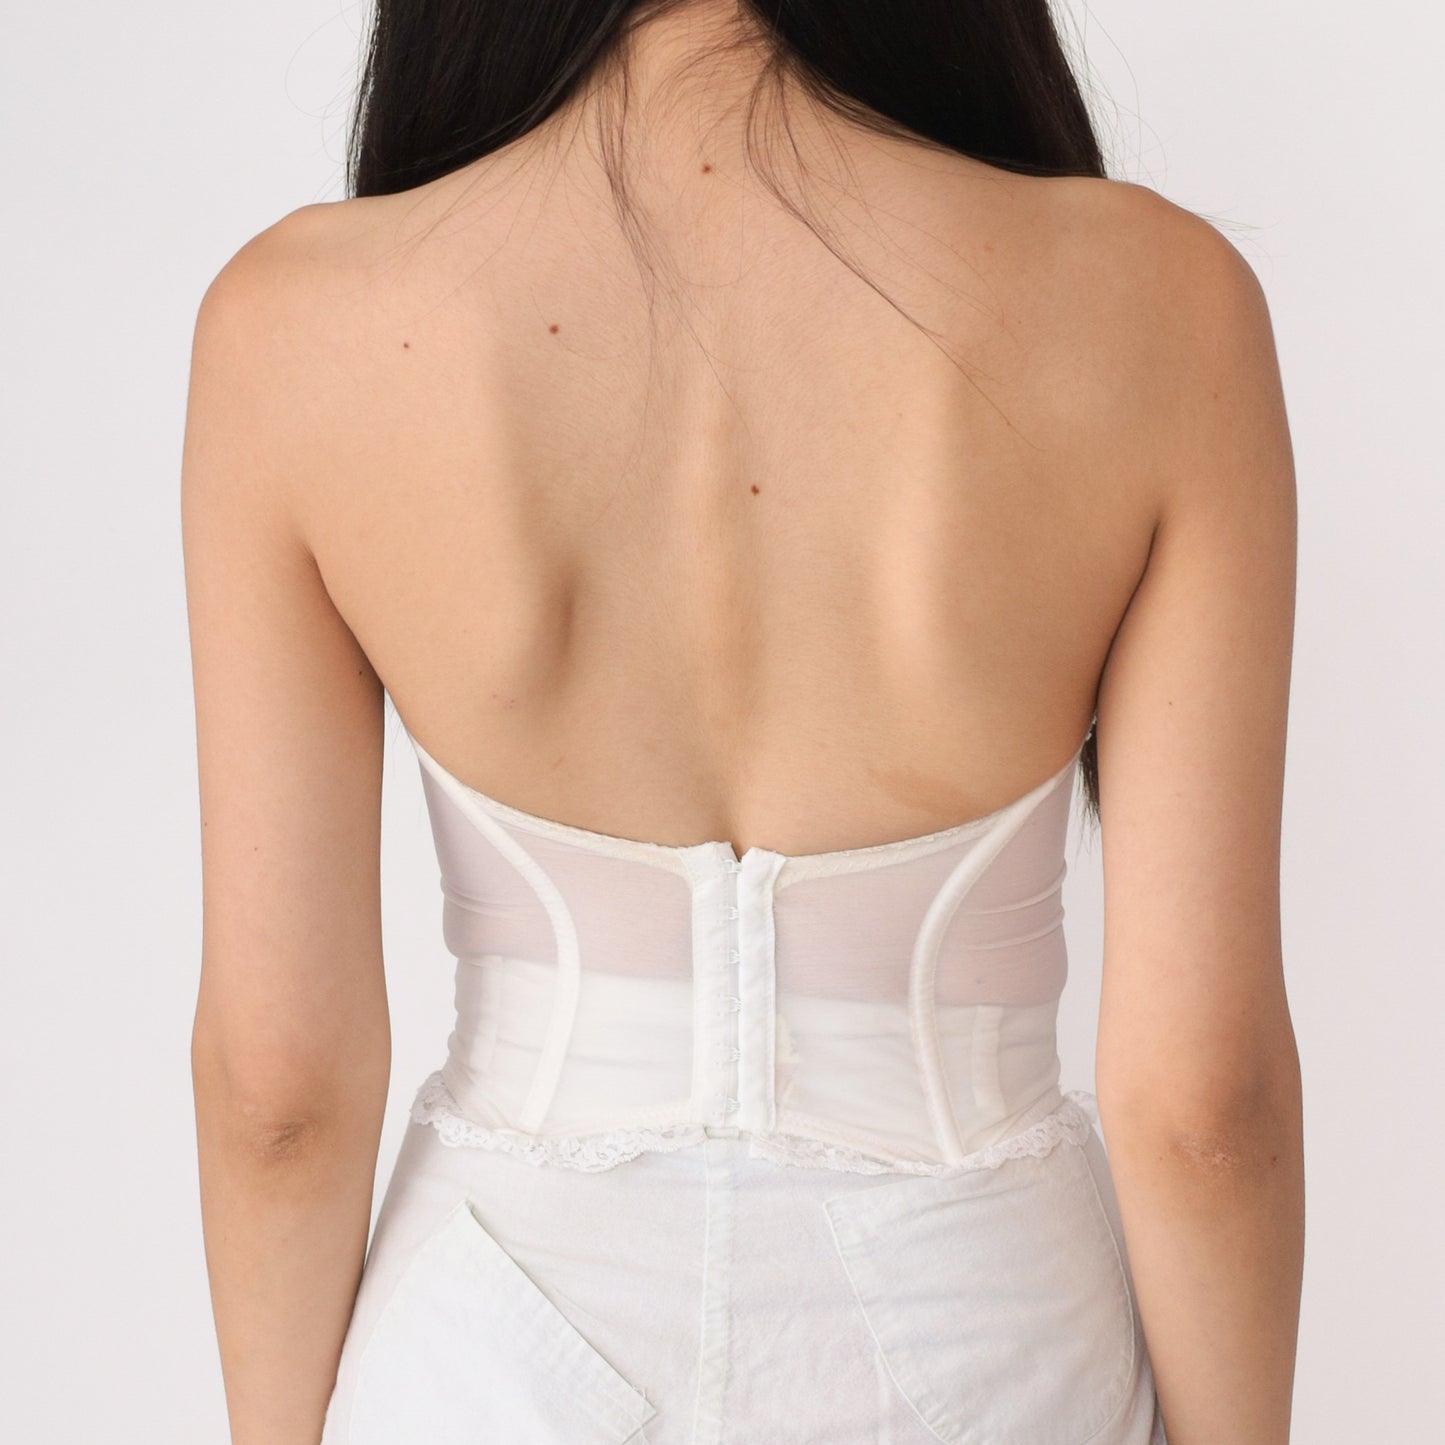 80's White Lace Bustier